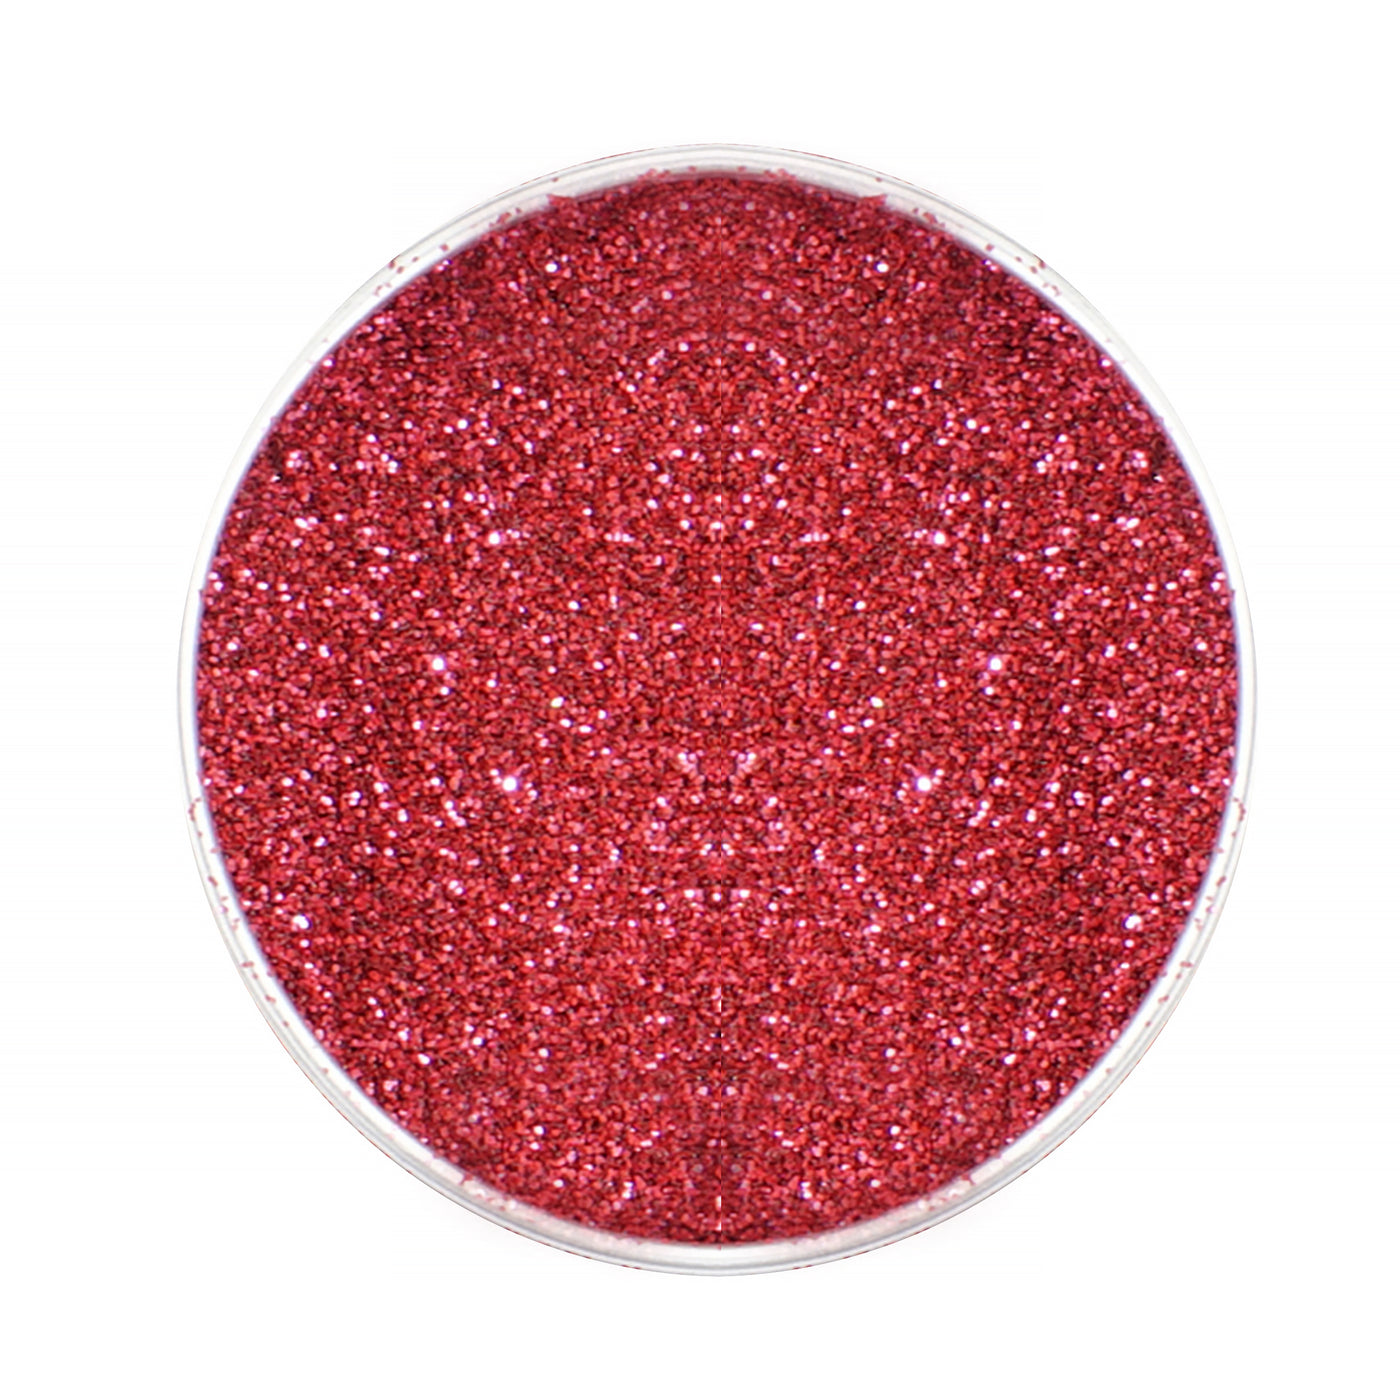 Red Biodegradable Cosmetic Glitter